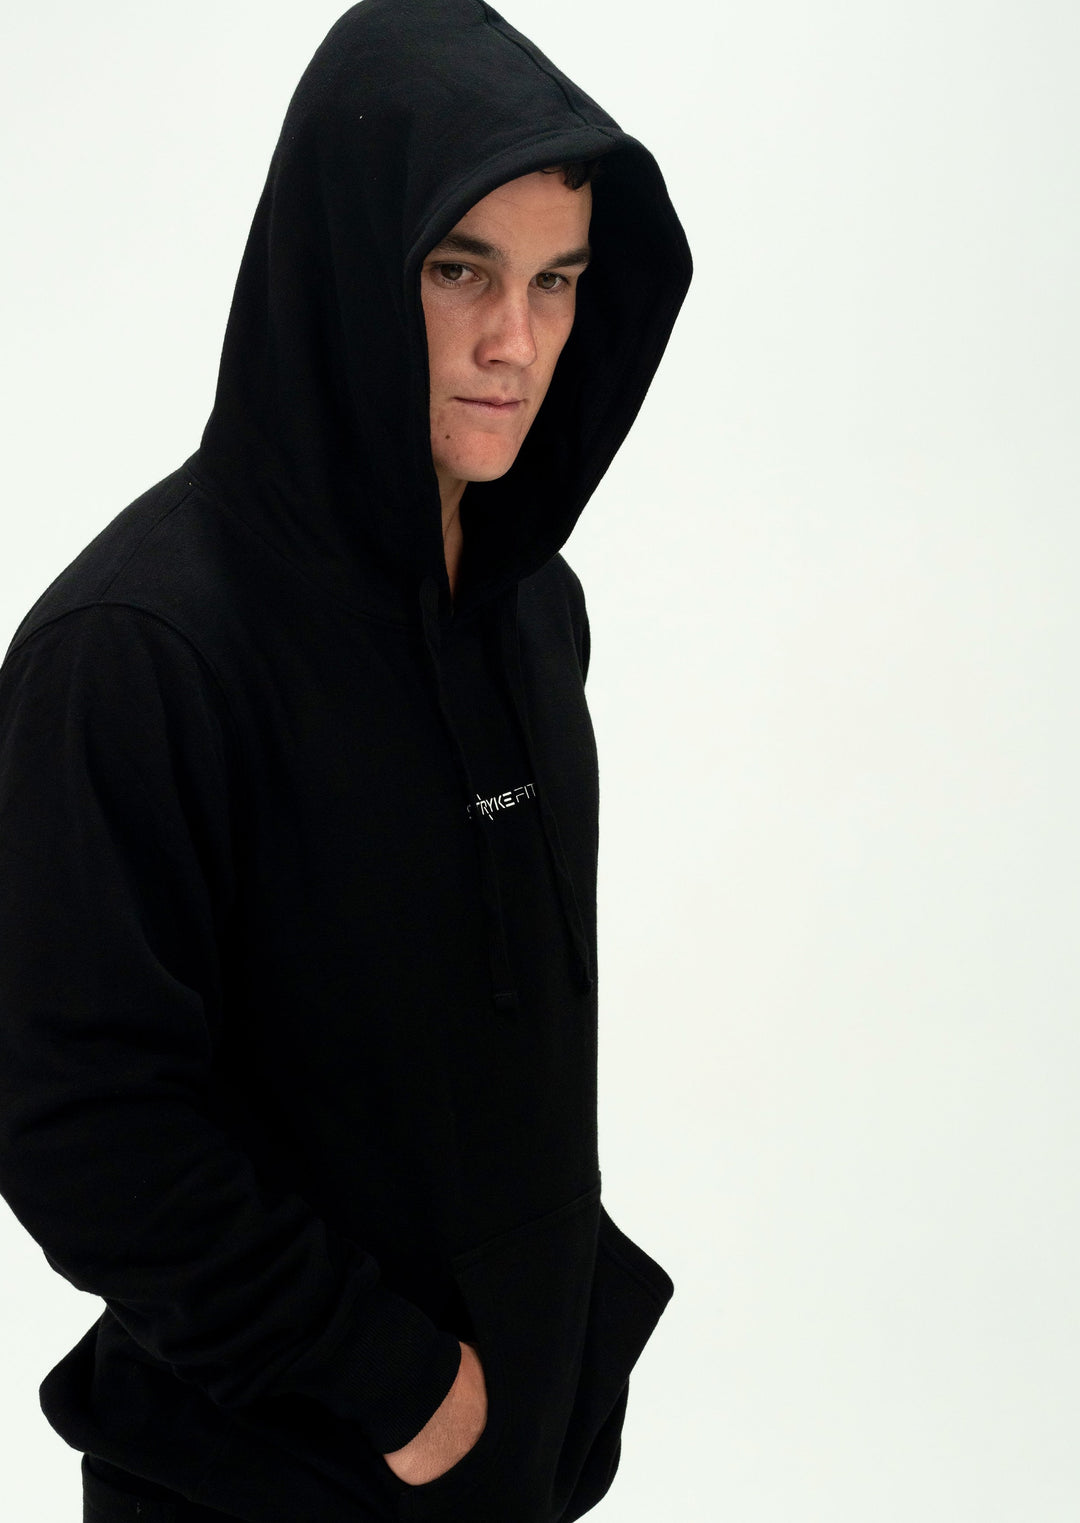 The SF HOODED FLEECE is an essential winter hoody that belongs in every wardrobe. Made from premium brushed fleece, it offers the perfect combination of comfort and style, perfect for the winter months.